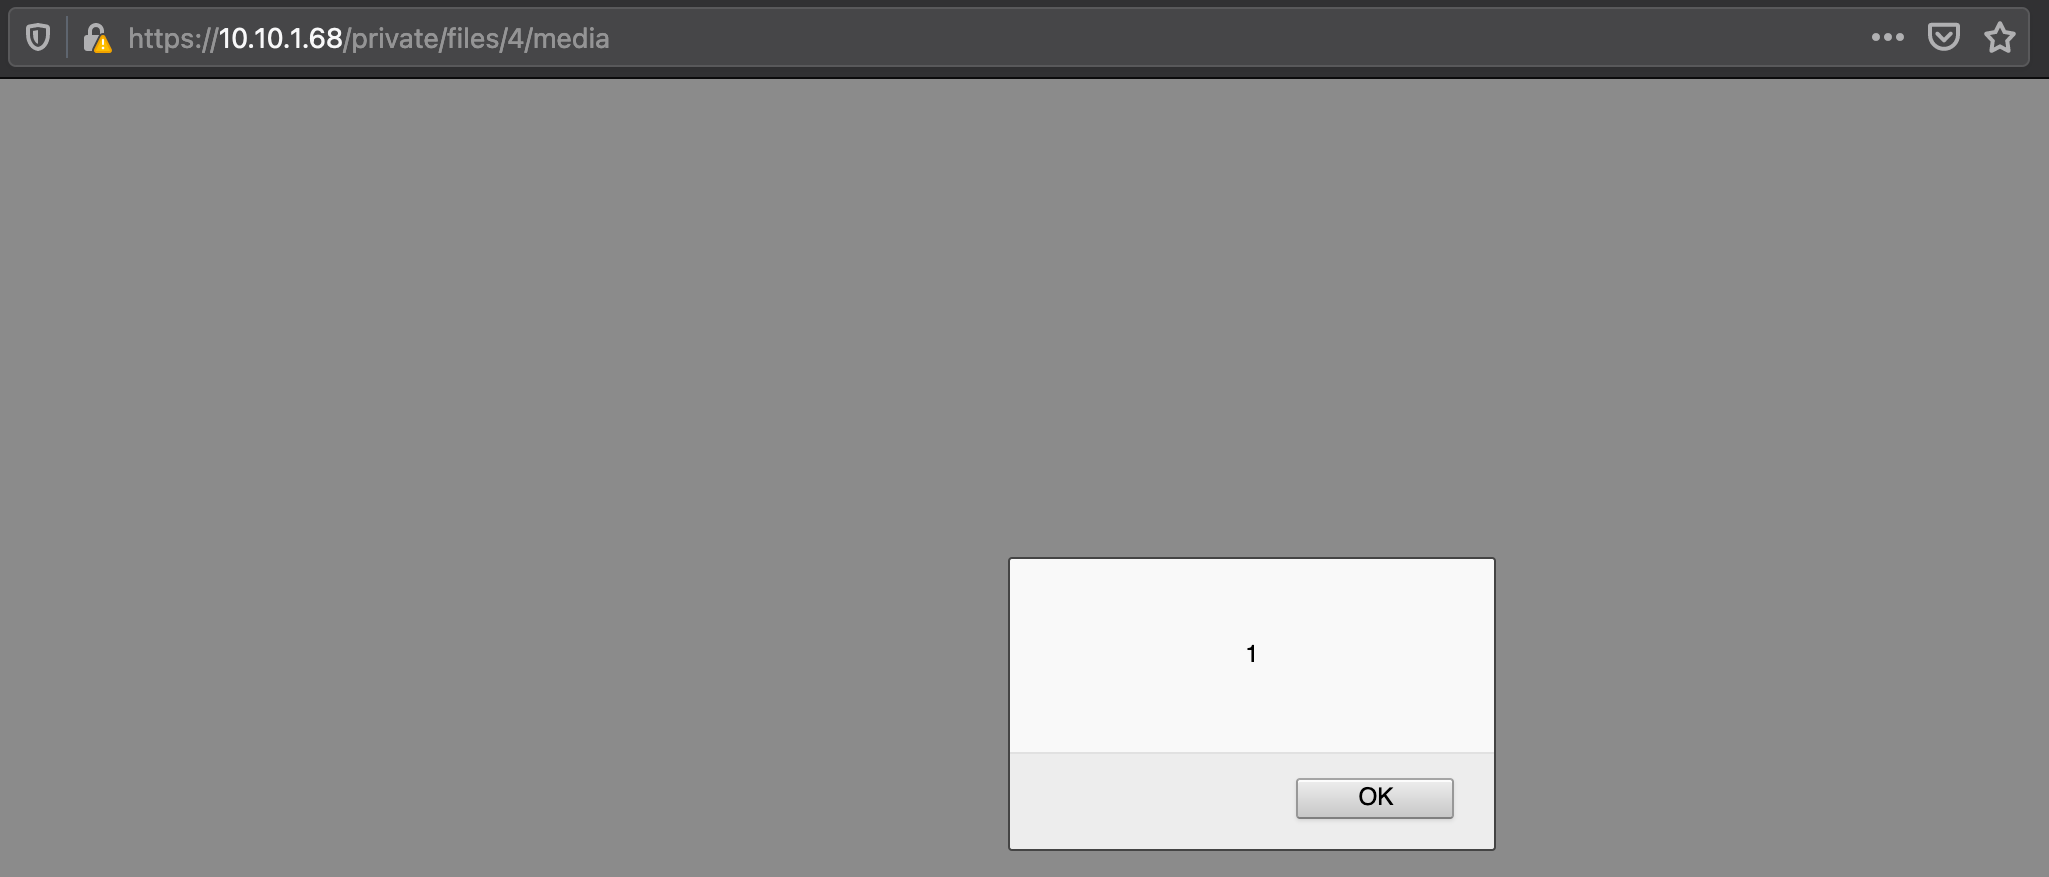 XSS through JavaScript embedded in an SVG file uploaded to a workspace.